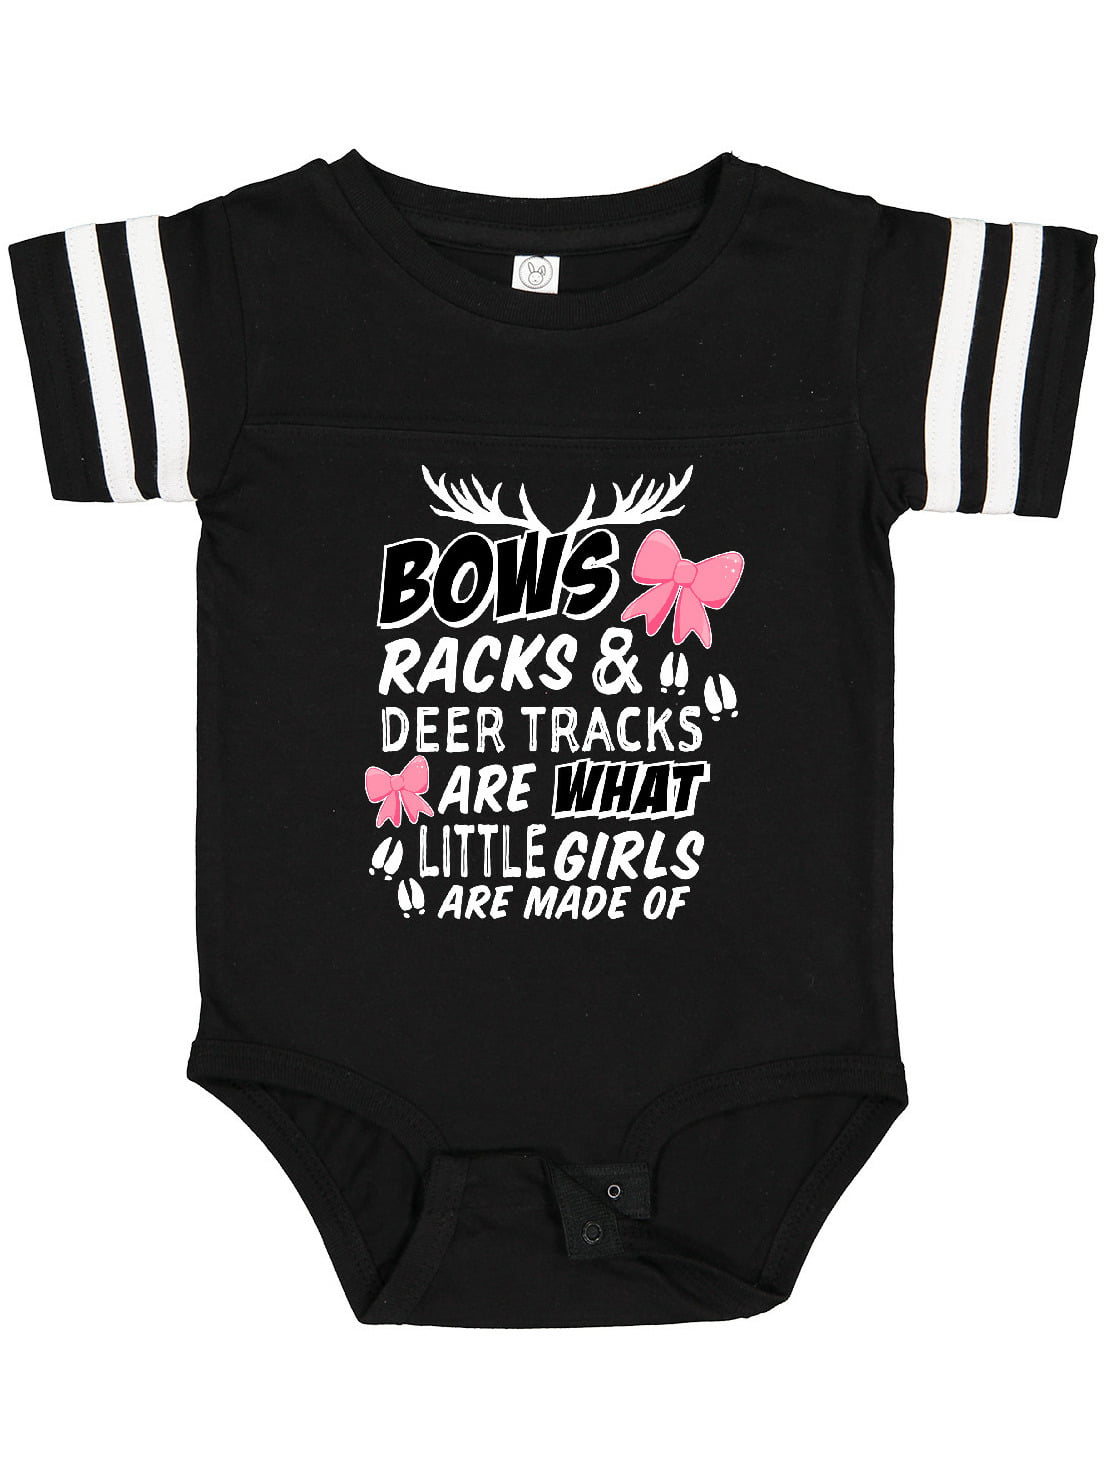 and Deer Tracks Are What Little Boys Are Made Of 3-6 Months Racks Outdoor Theme Baby Shower Present 